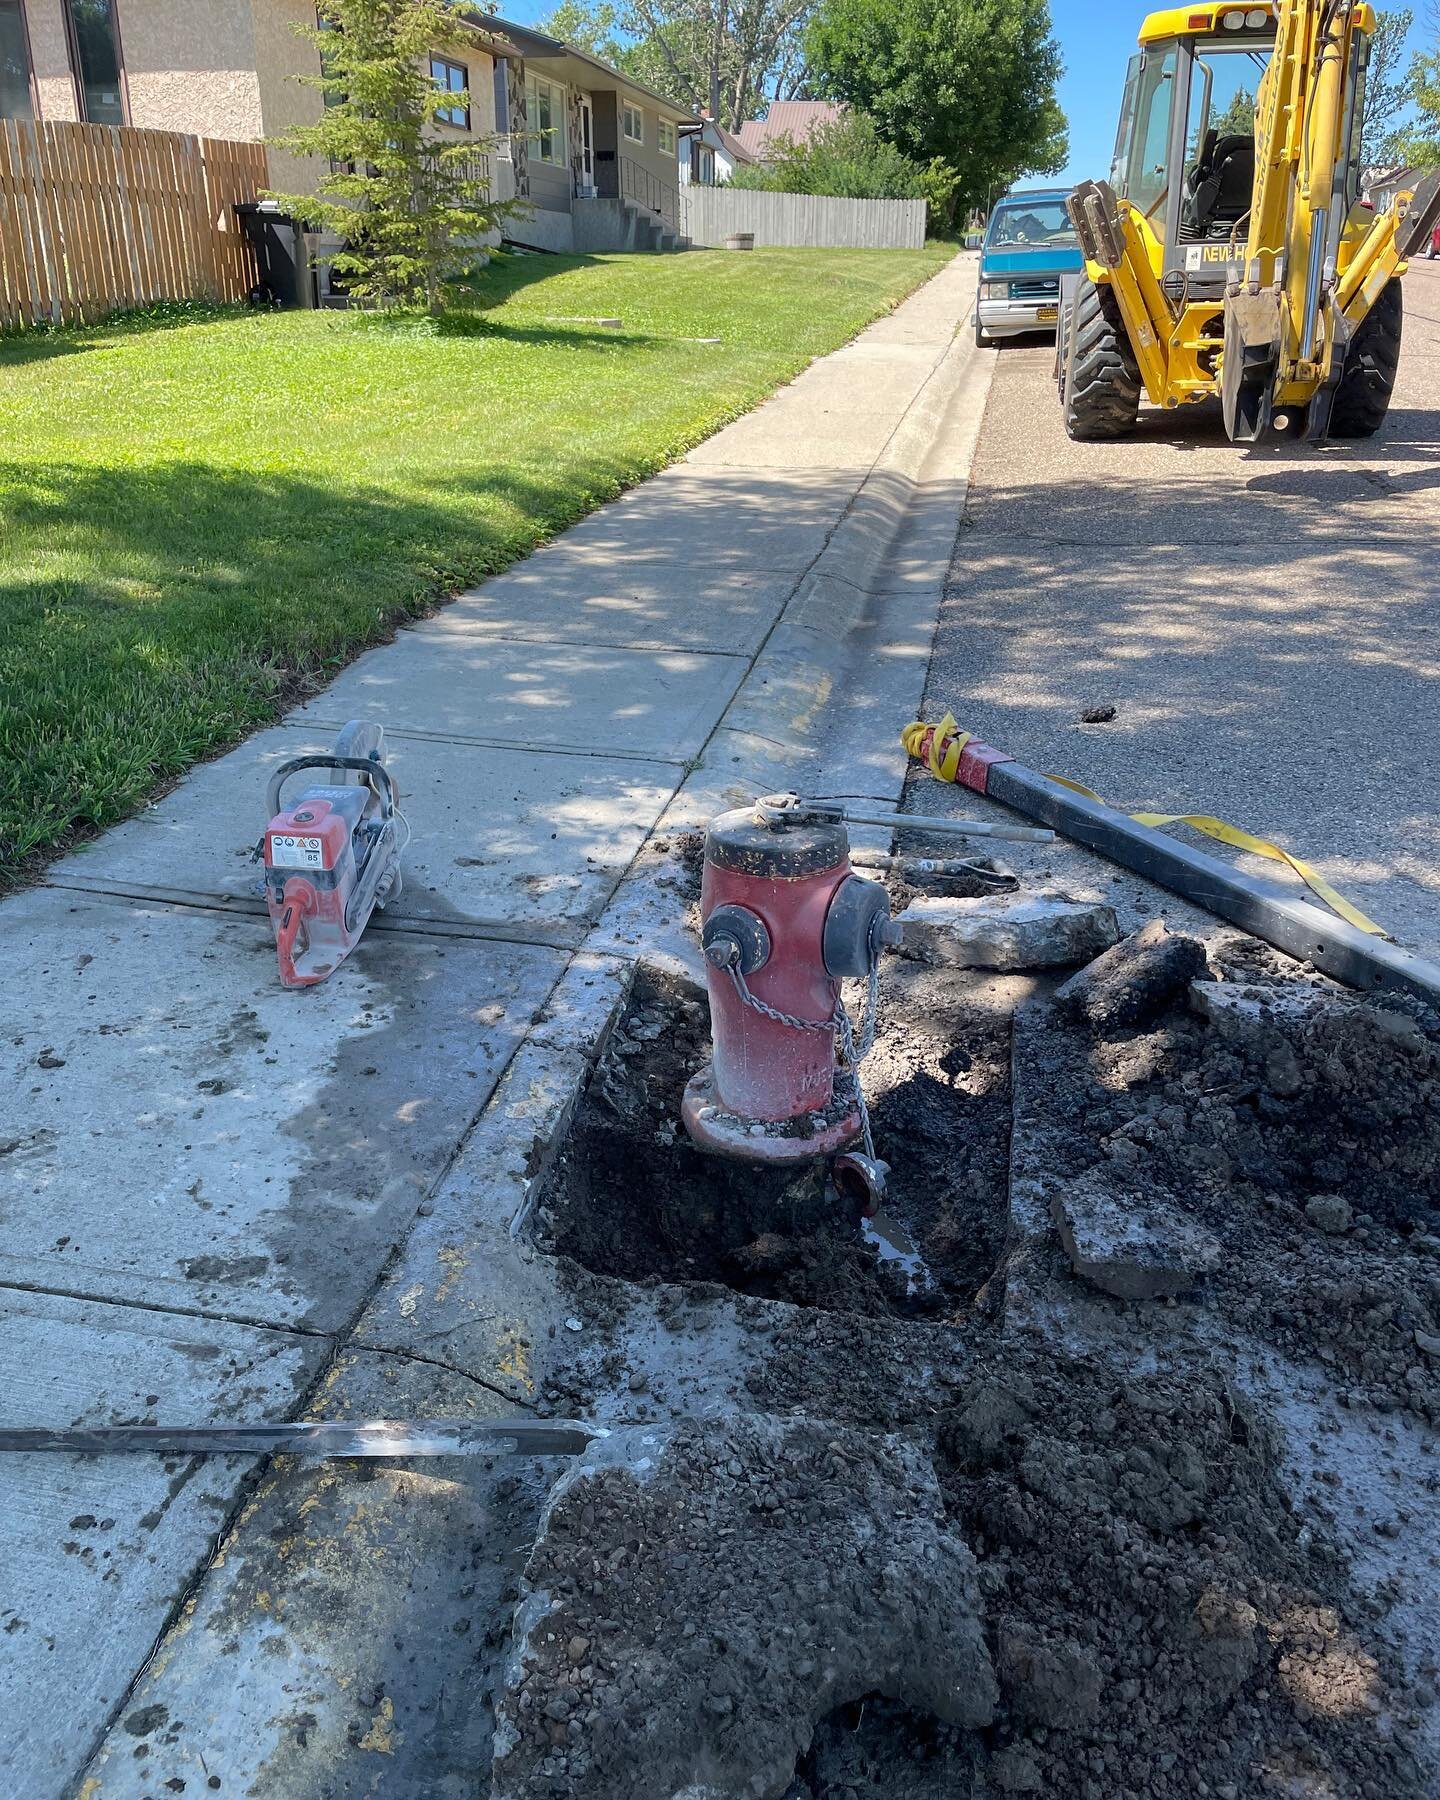 Fire Hydrants aren&rsquo;t a simple piece of equipment! Bottom end repair done in Coutts. 

#hottapping #plumbing #construction #trucks #hydrant #fyp #yyc #alberta #f4f #work #britishcolumbia #saskatchewan #hvac #clow